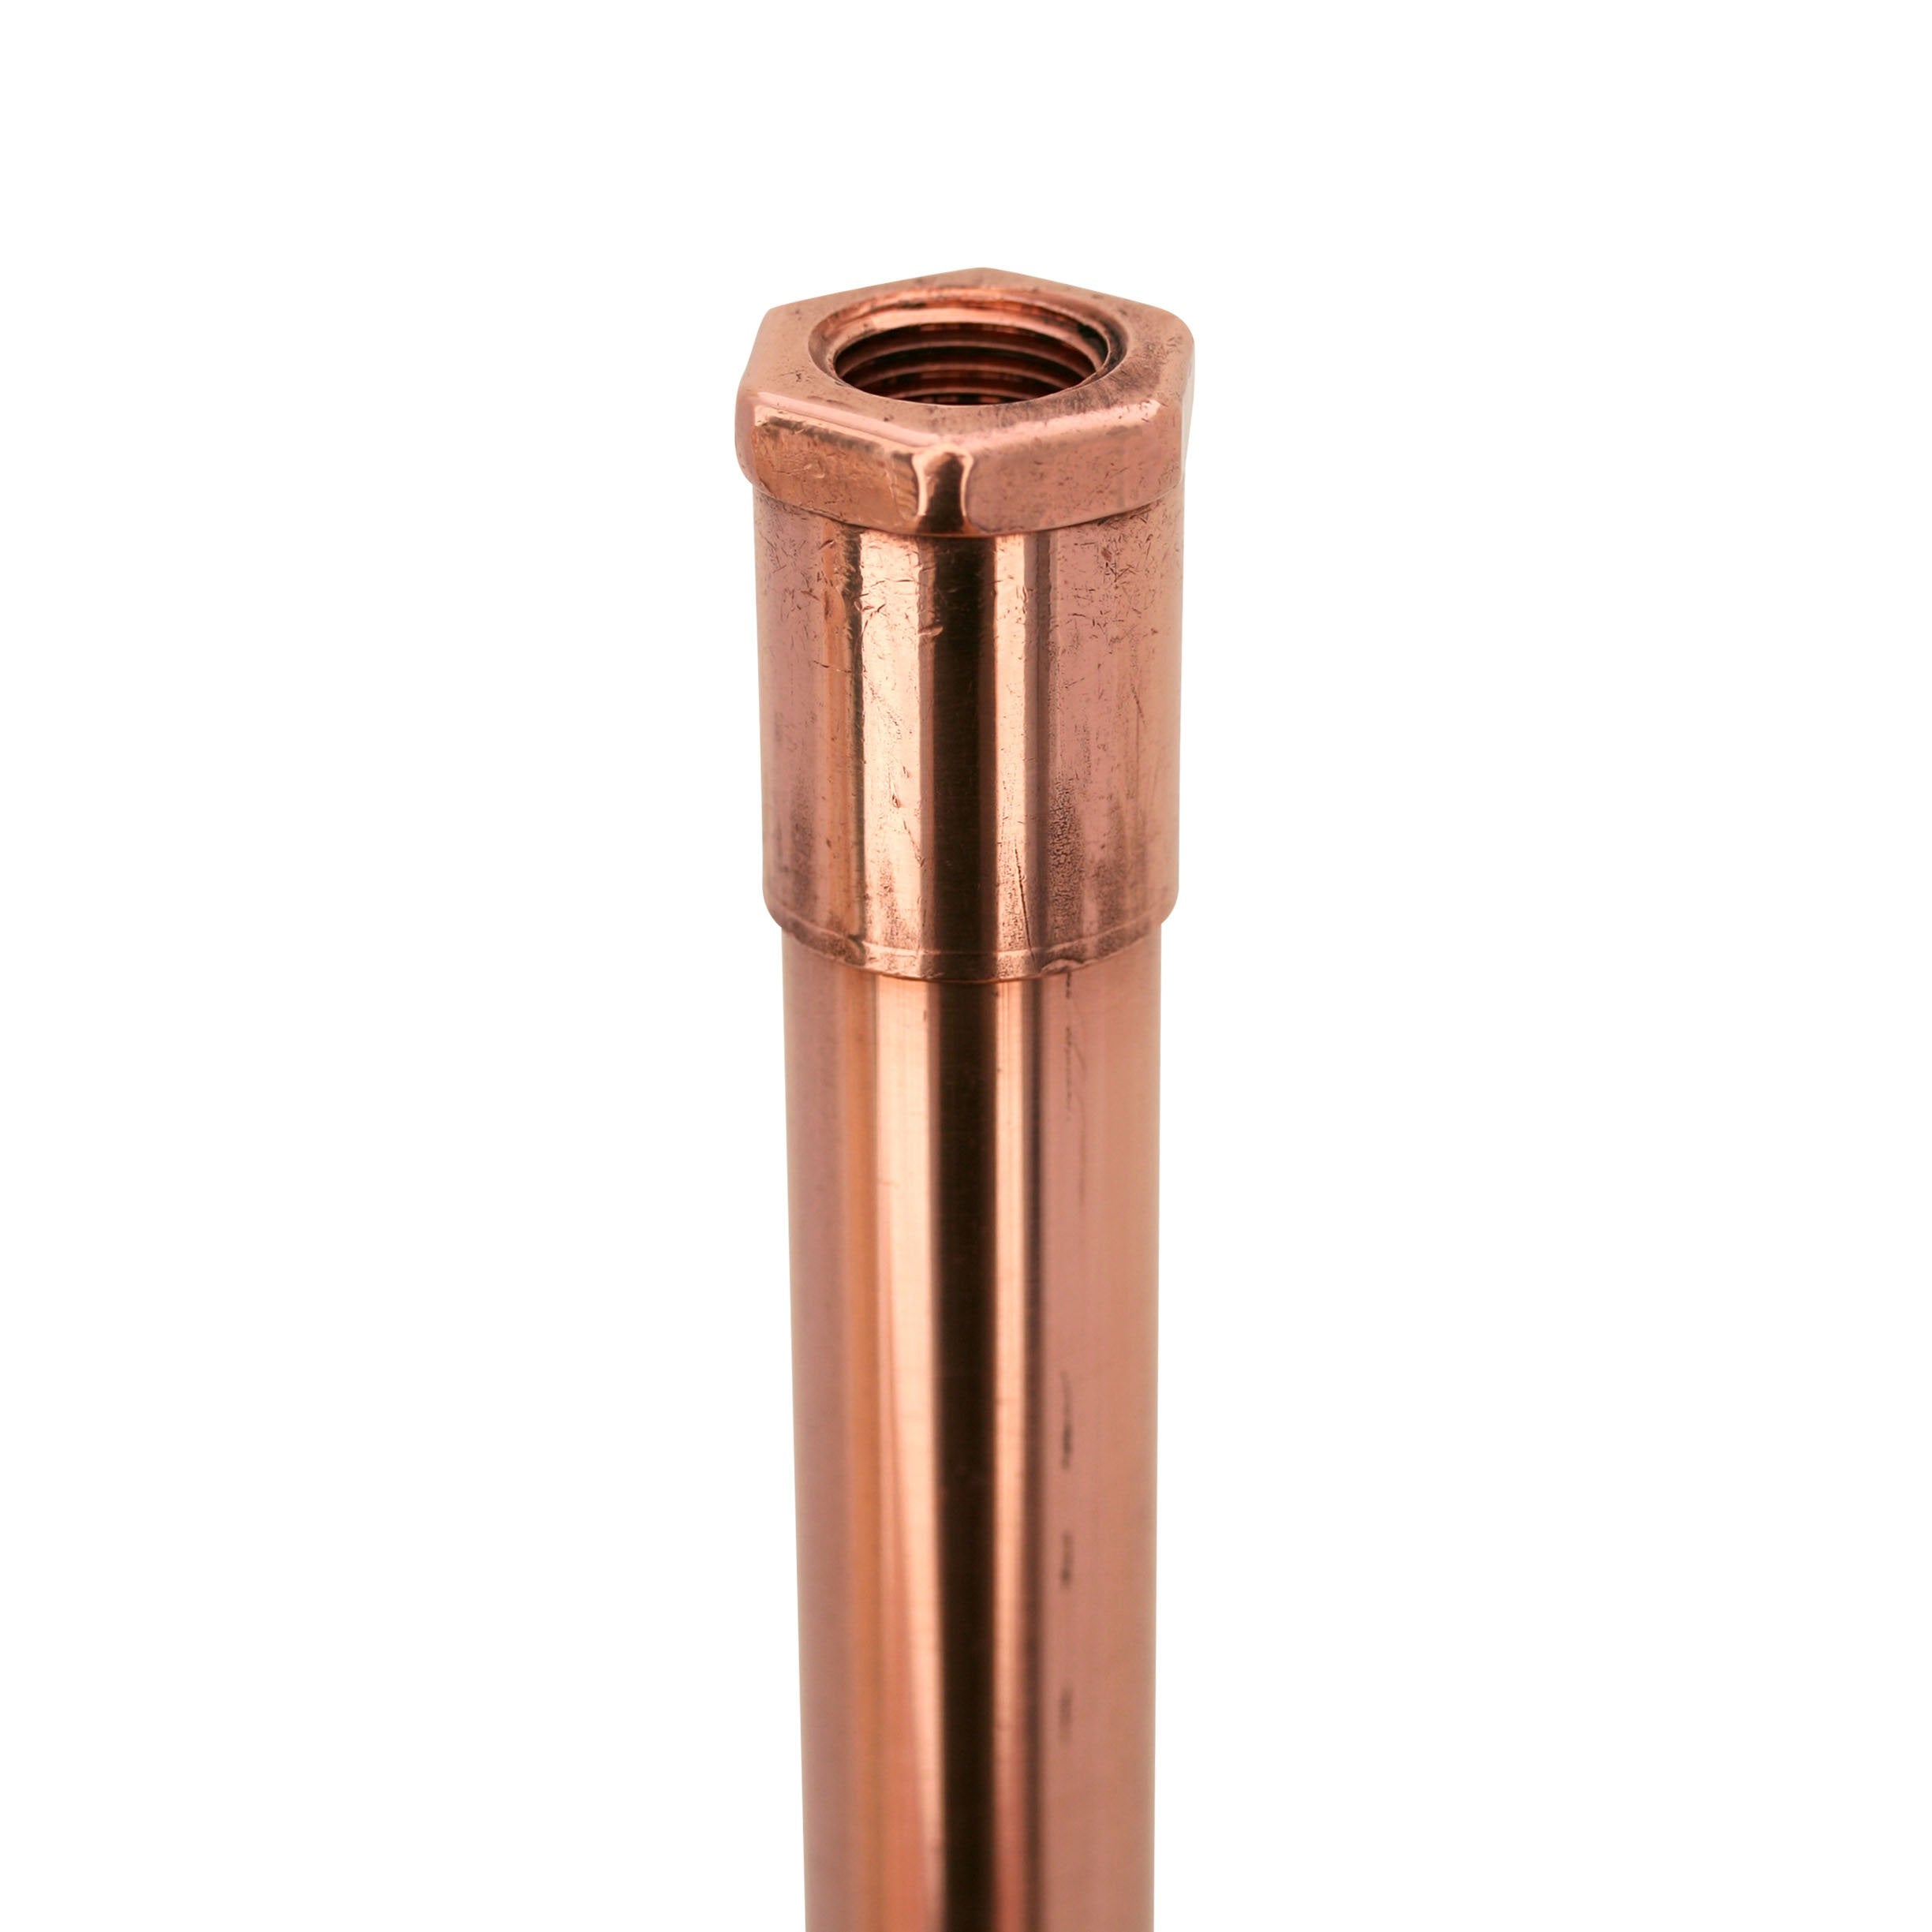 CopperMoon Custom Copper Stem ONLY for CM.6014 path light